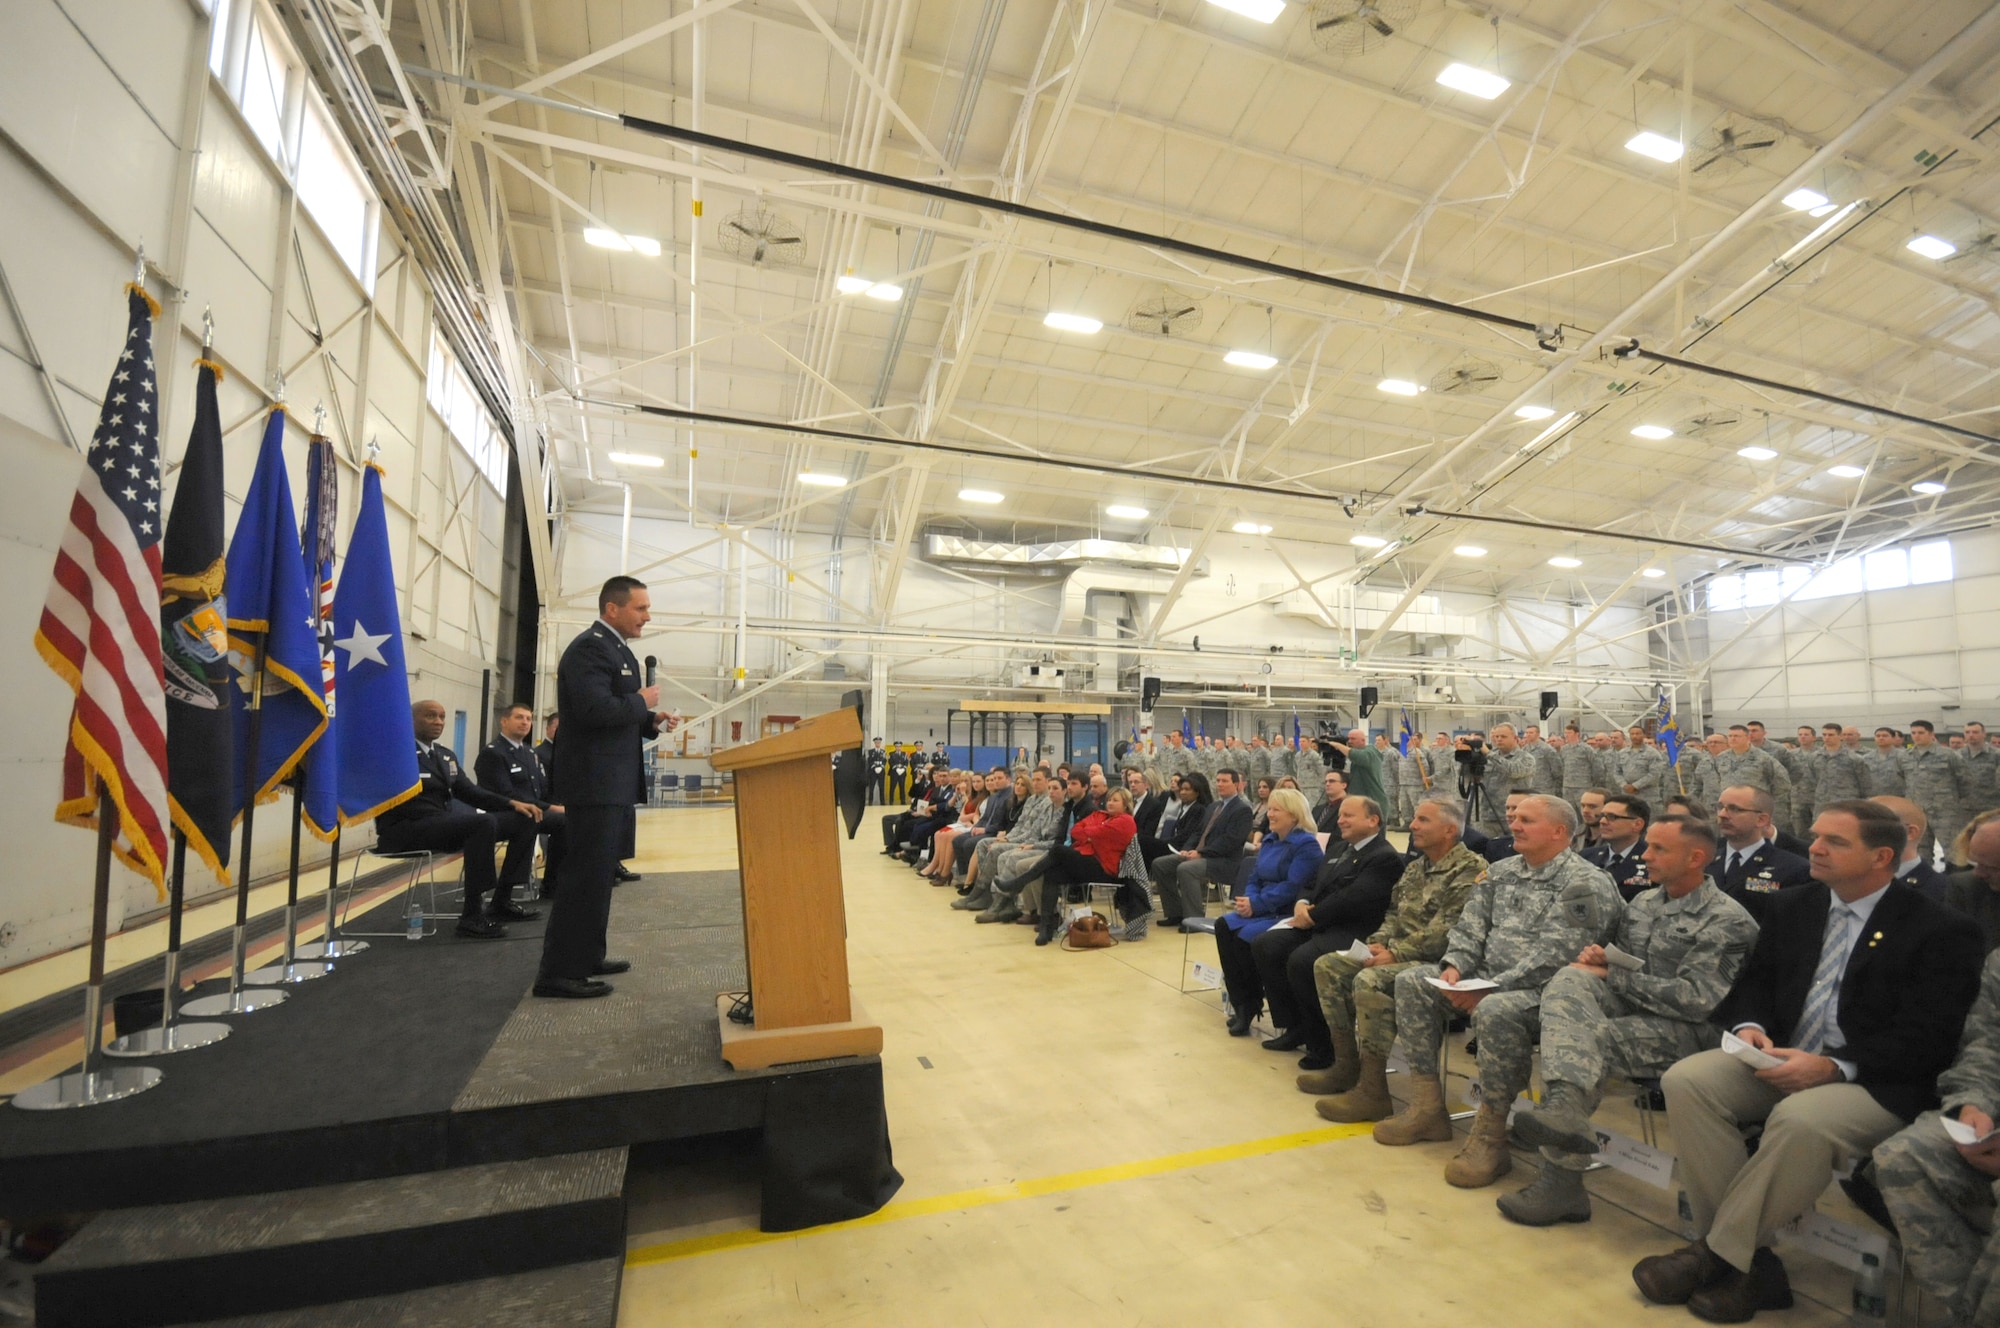 Col. Bryan Teff assumes command of the 110th Attack Wing, Battle Creek Air National Guard Base, Mich., Saturday, December 5, 2015 in the hangar of the Wing. Teff will be taking over the role of commander from Col. Ronald Wilson who has been the wing commander for three years. (Air National Guard Photo by Master Sgt. Sonia Pawloski/released)